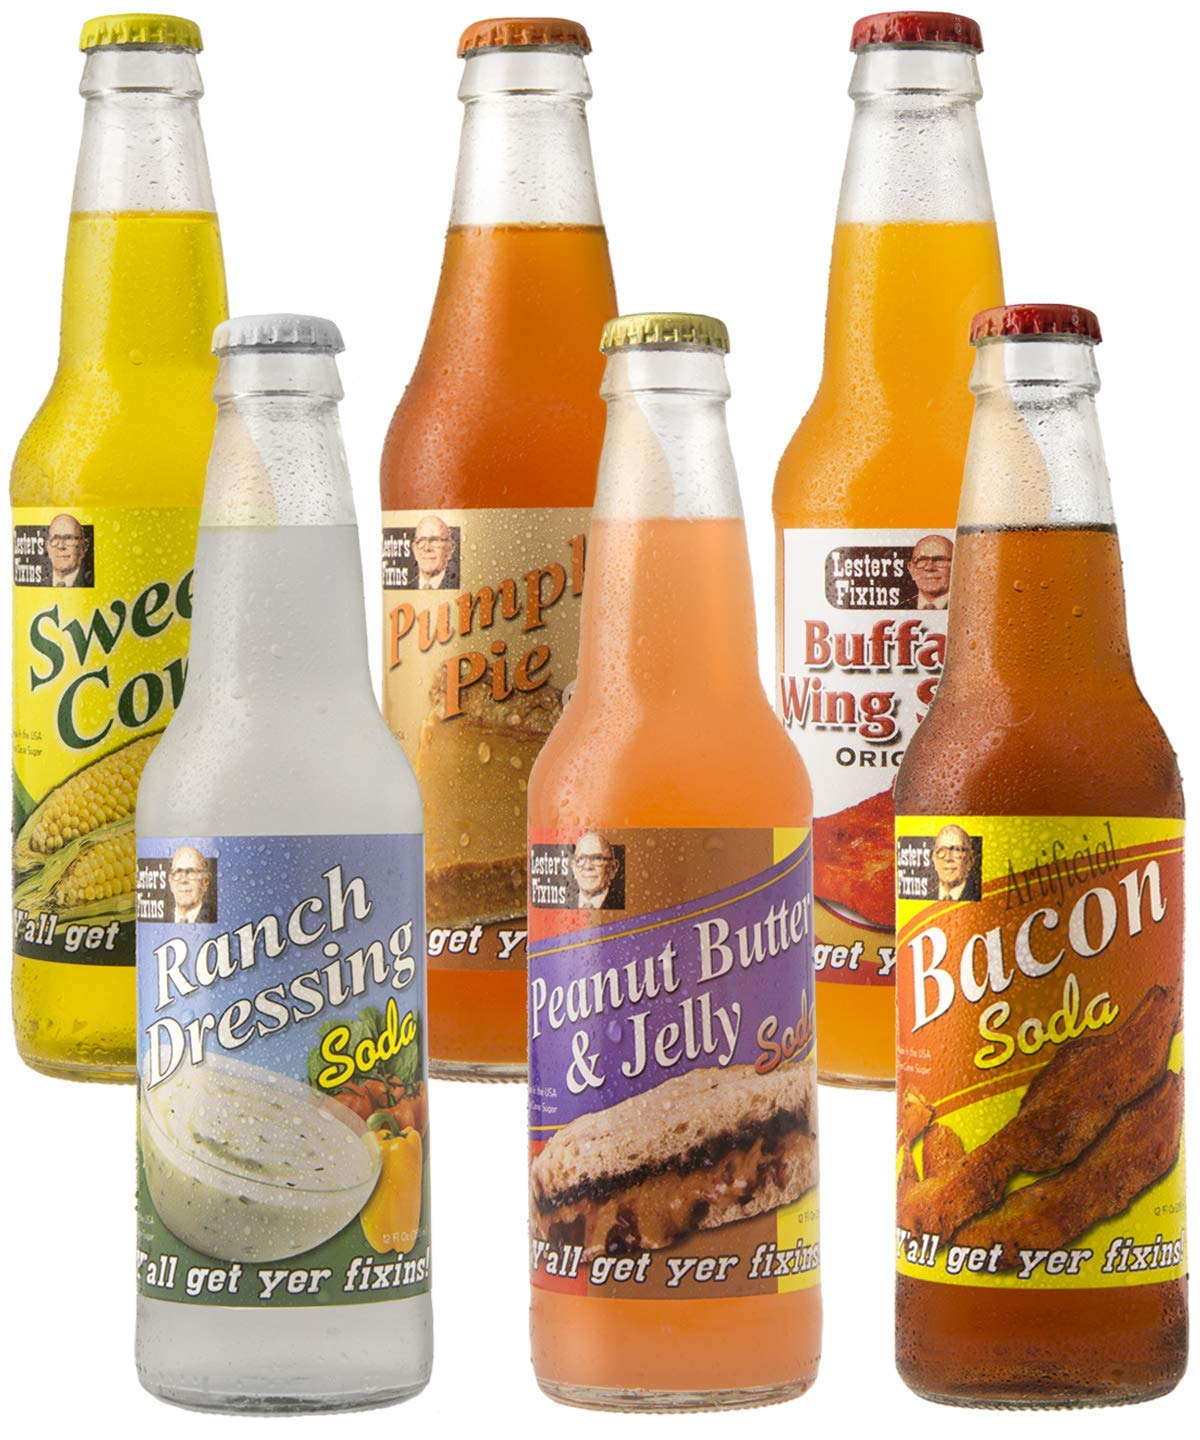 There's a bit of a niche industry around making sodas that don't taste like sodas.<br><br>Buffalo wings, ranch dressing, corn those flavors and more are available <a href="https://amzn.to/2ypIe1n" "nofollow" target="_blank">here</a>.